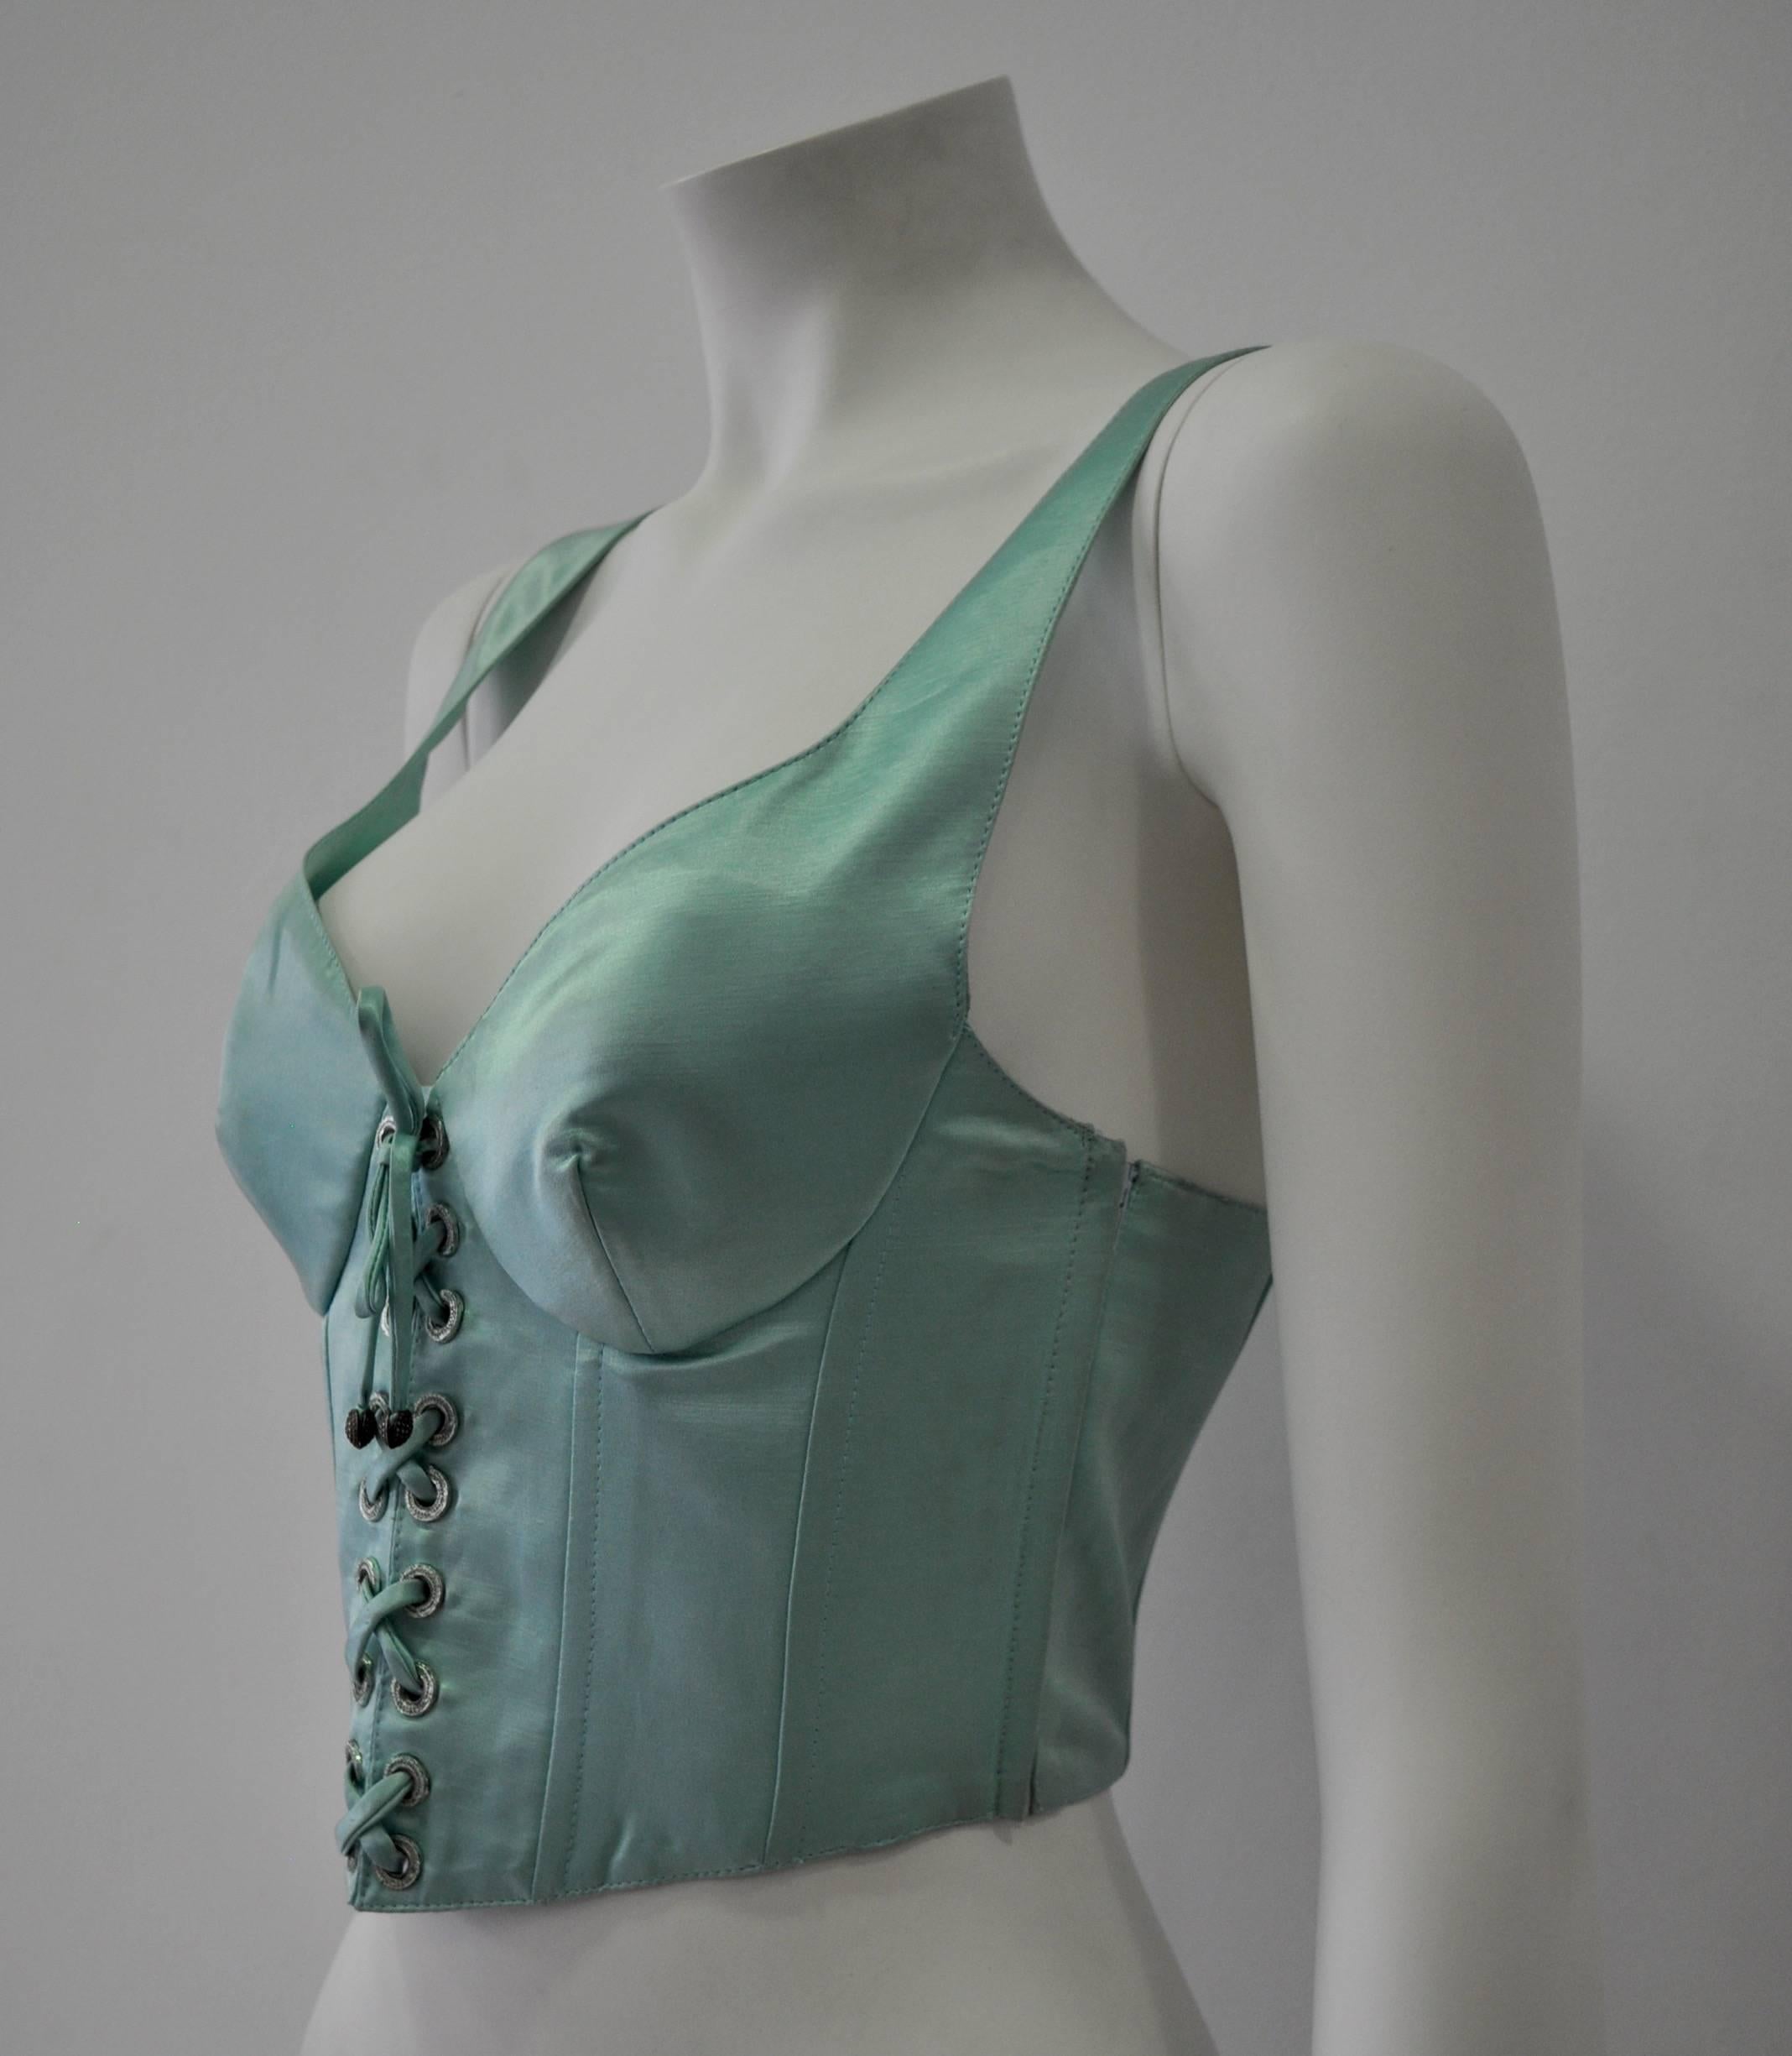 Women's Iconic Gianni Versace Istante Mint Green Bustier